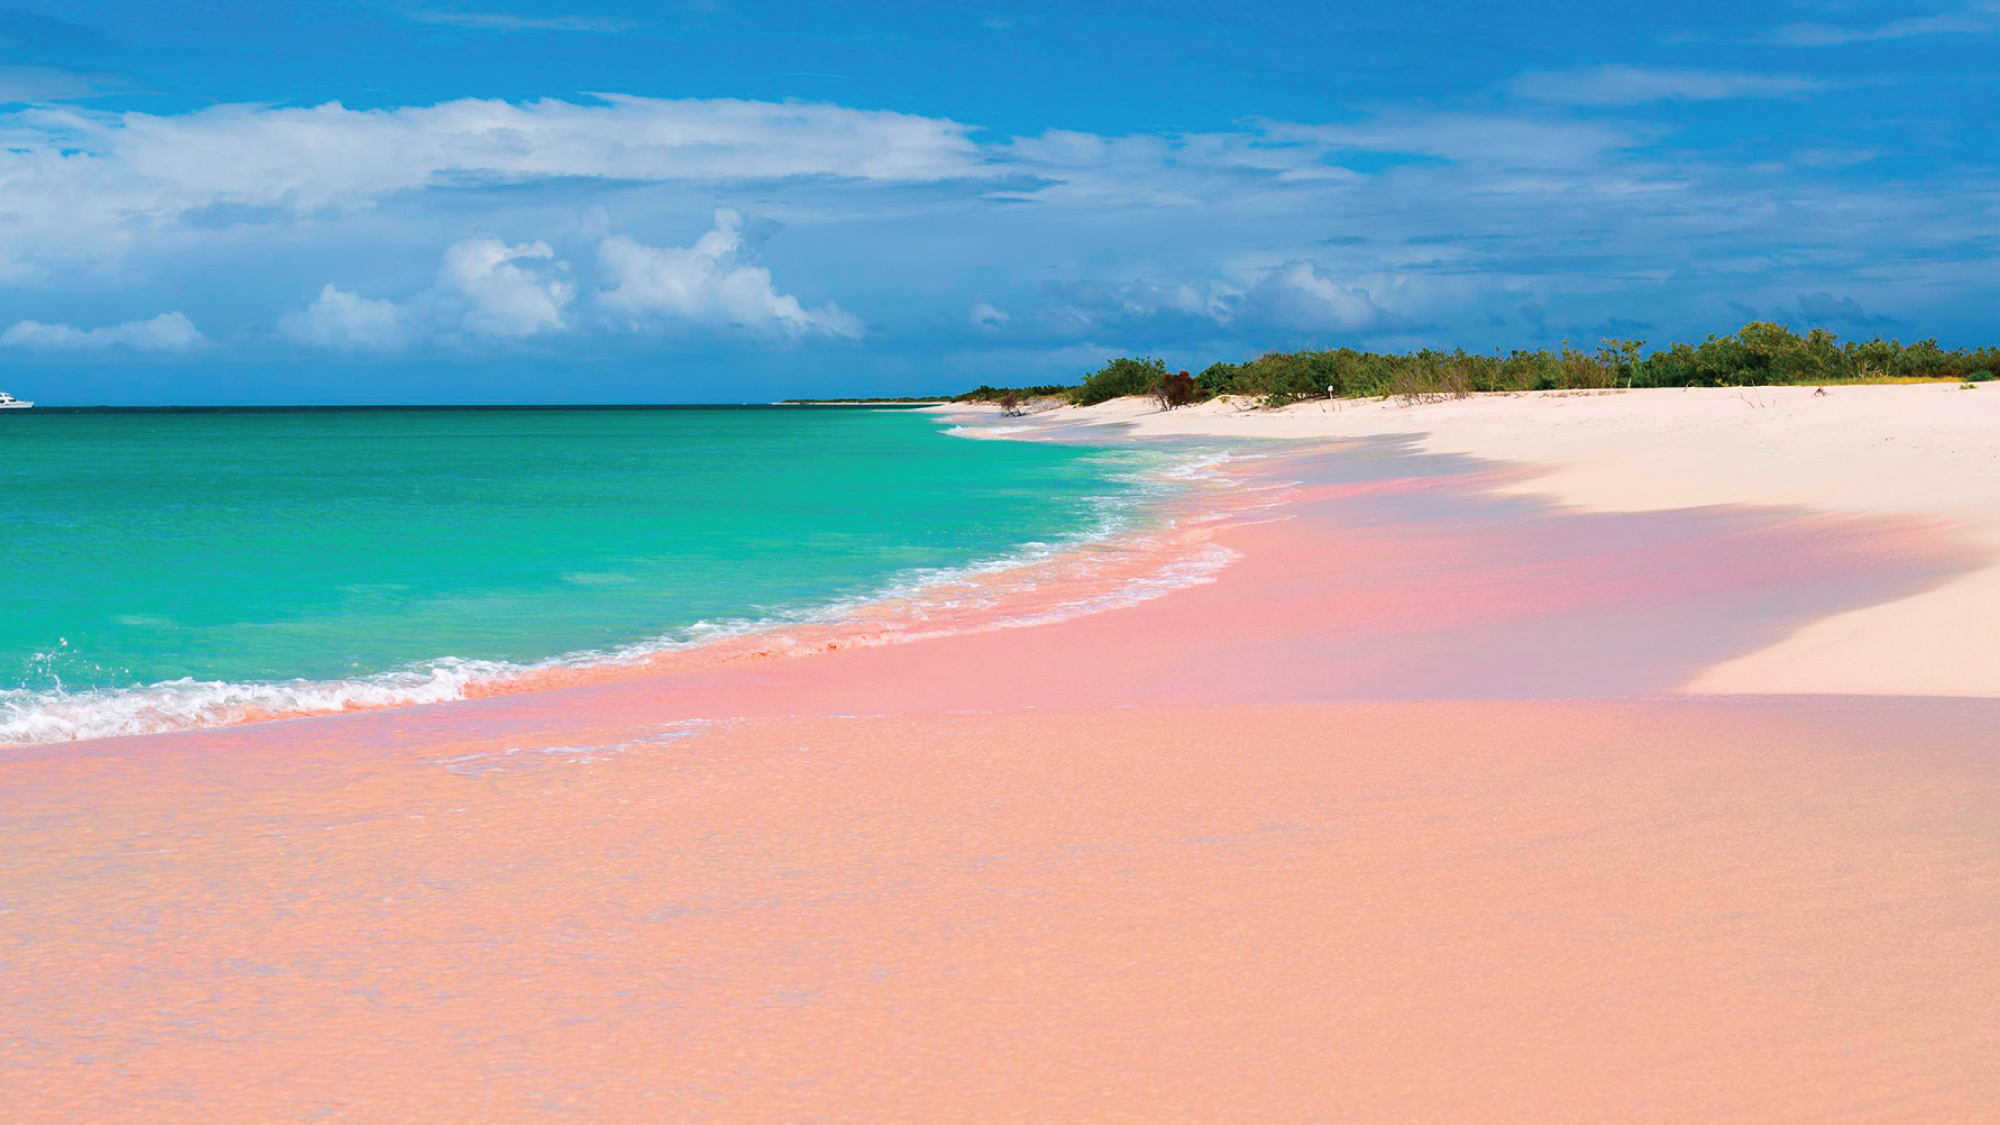 A stunning pink sand beach on Harbour Island, Bahamas, beckoning self-flying pilots to discover this picturesque destination